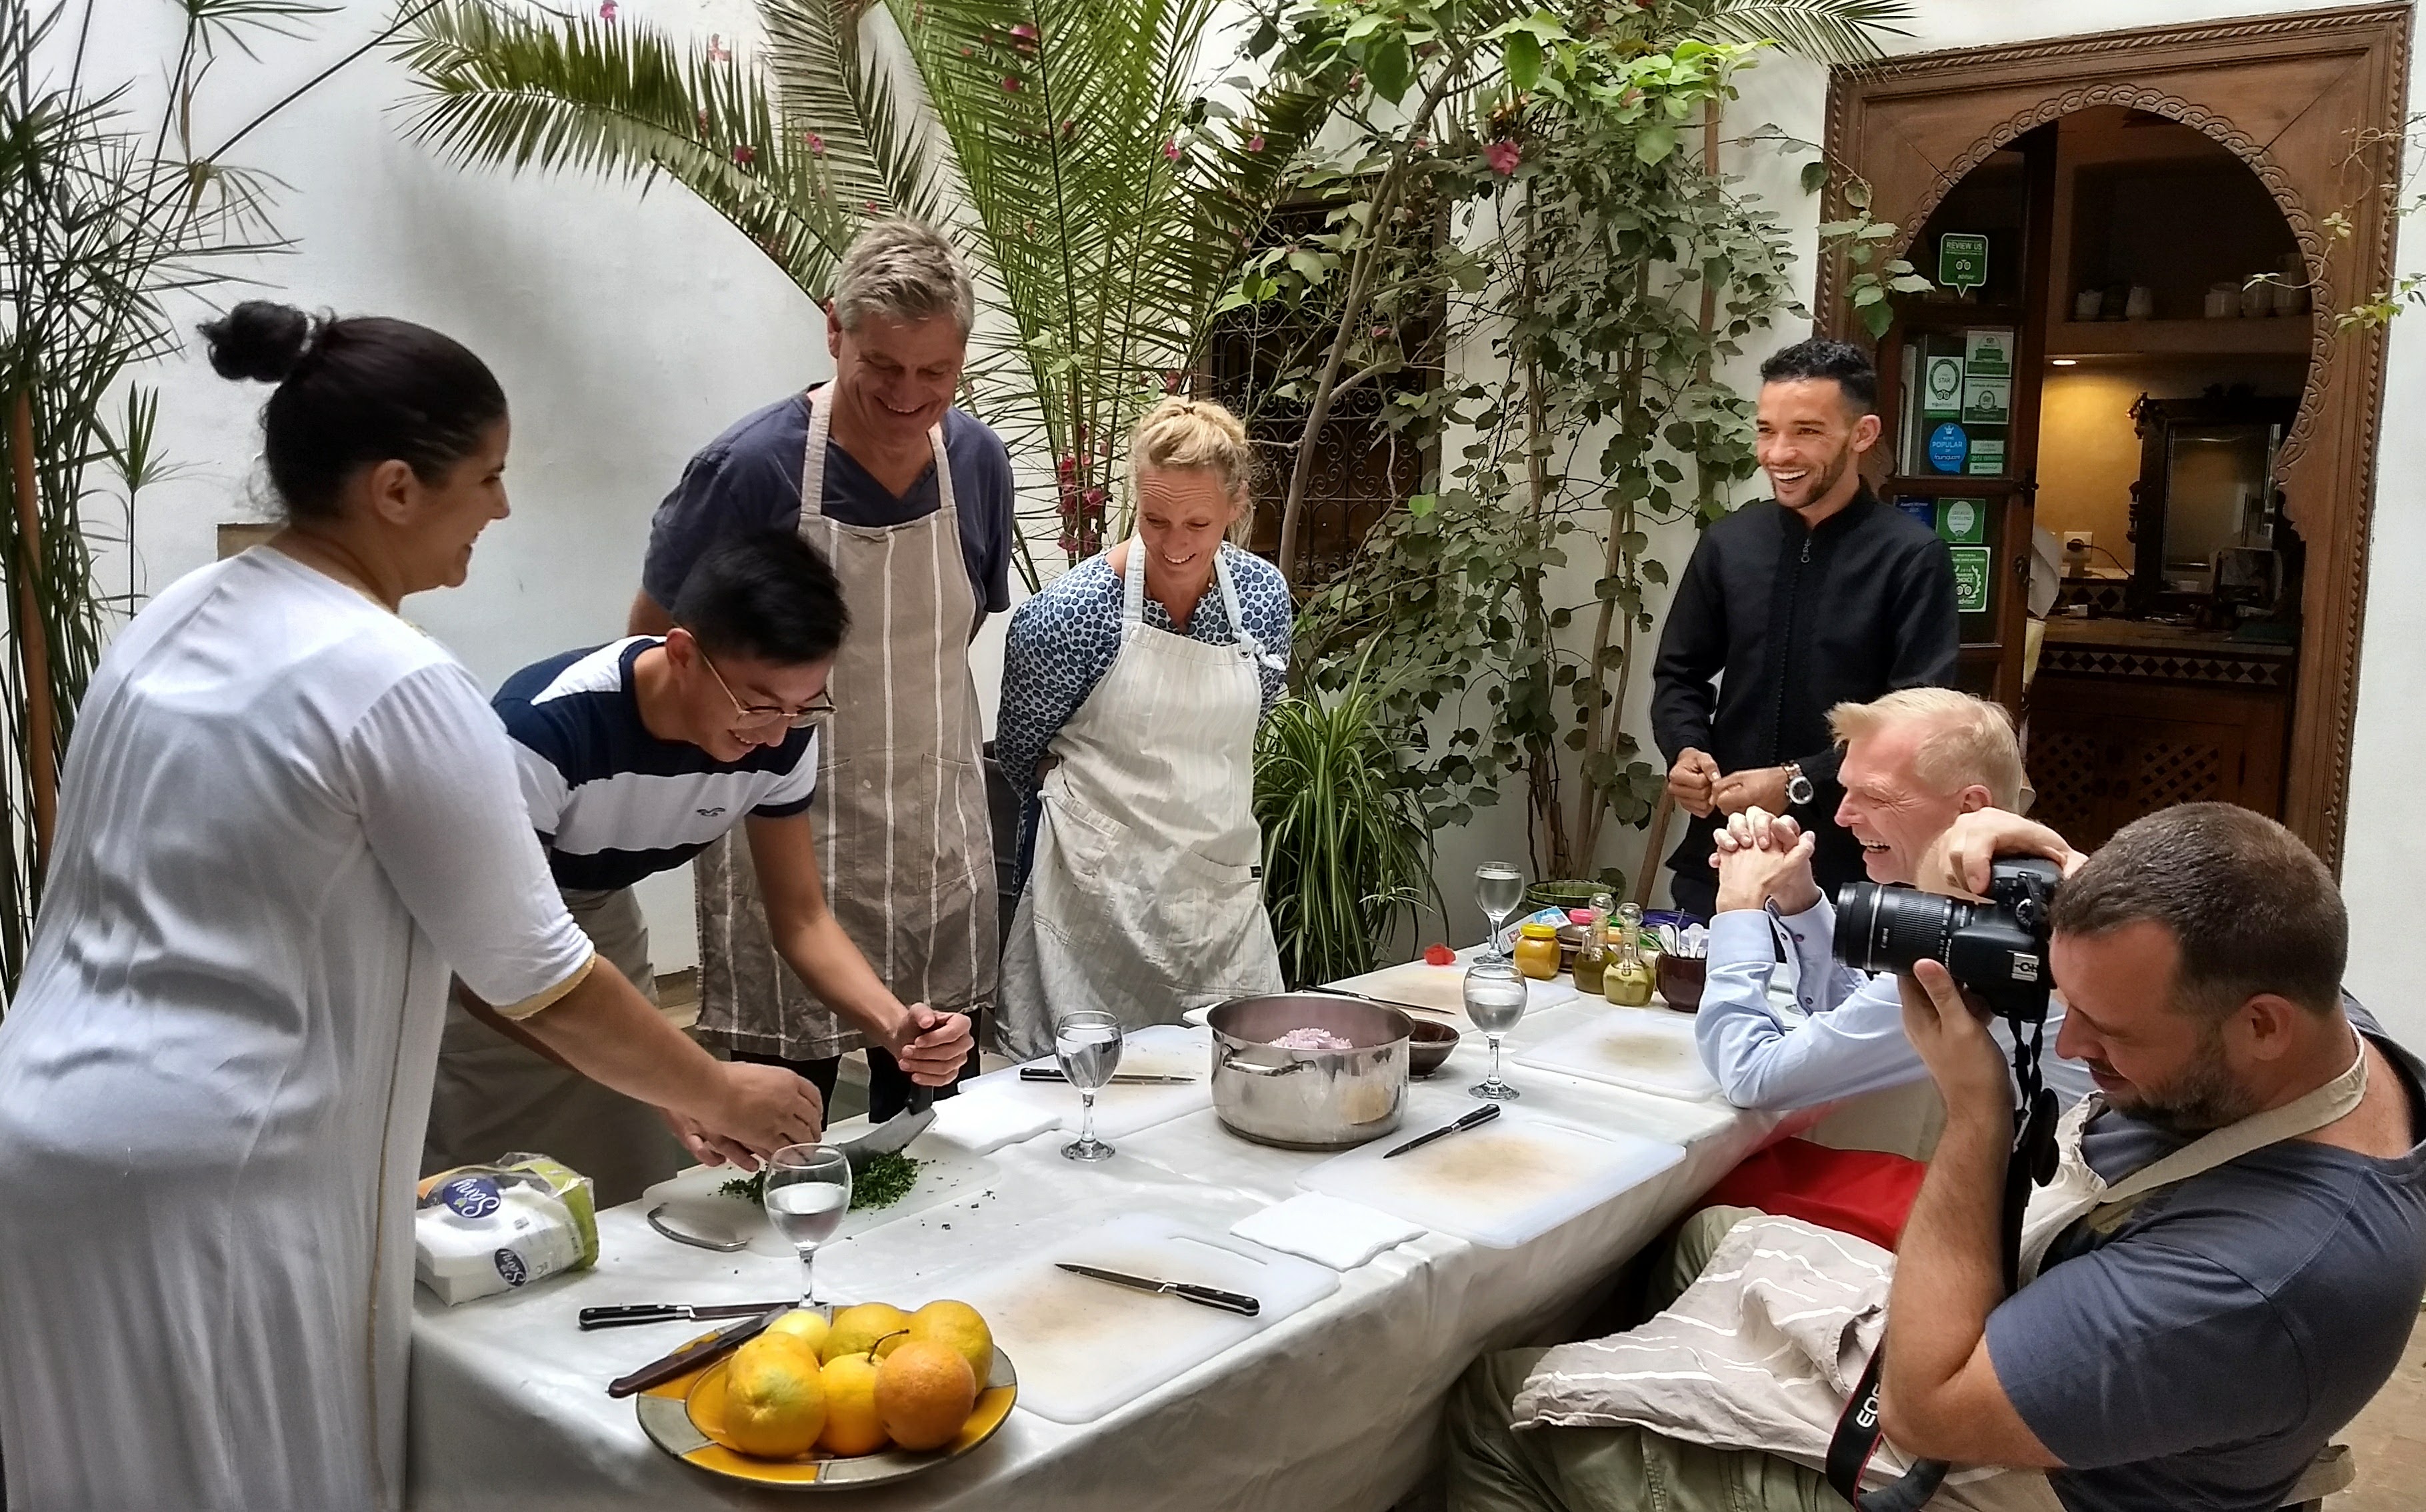 Morocco cooking class tour in Essaouira to cook traditional dishes